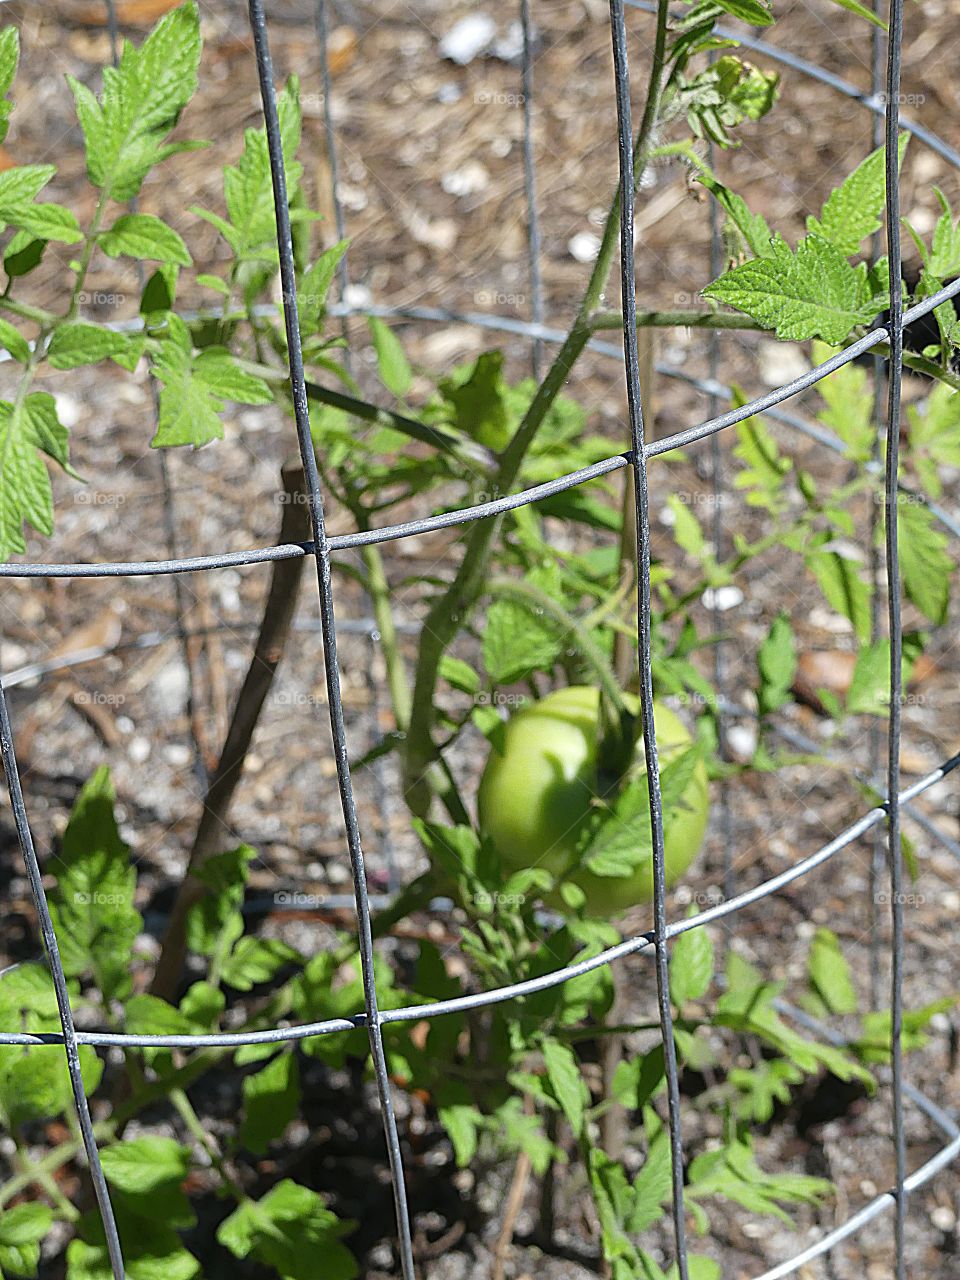 Gaged tomato plant with tomatoes 